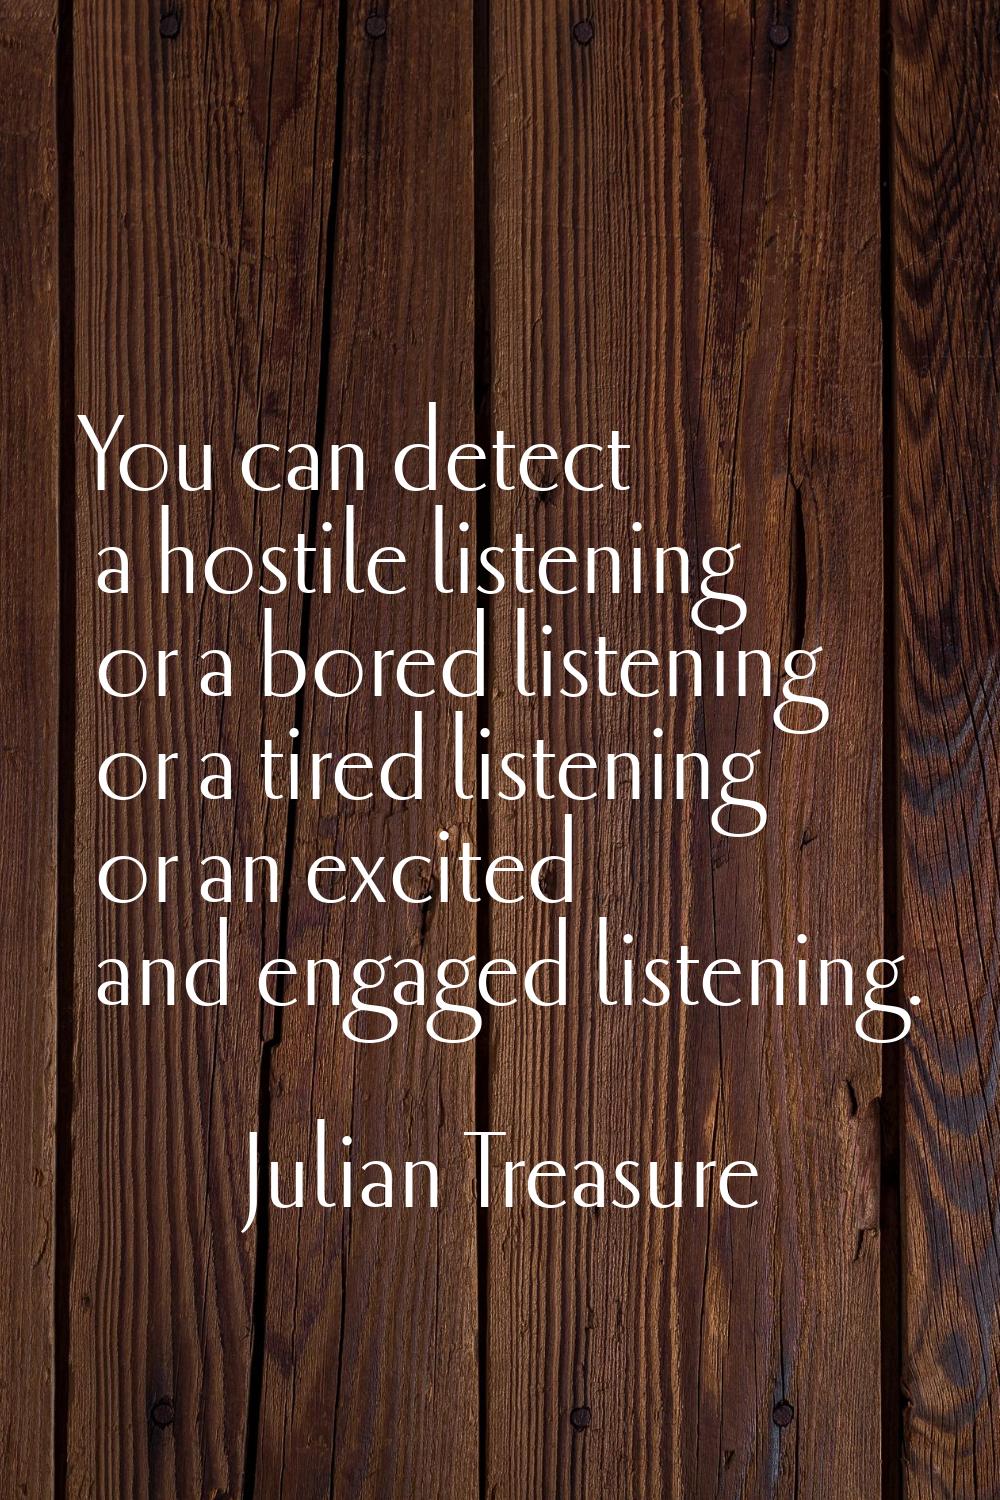 You can detect a hostile listening or a bored listening or a tired listening or an excited and enga